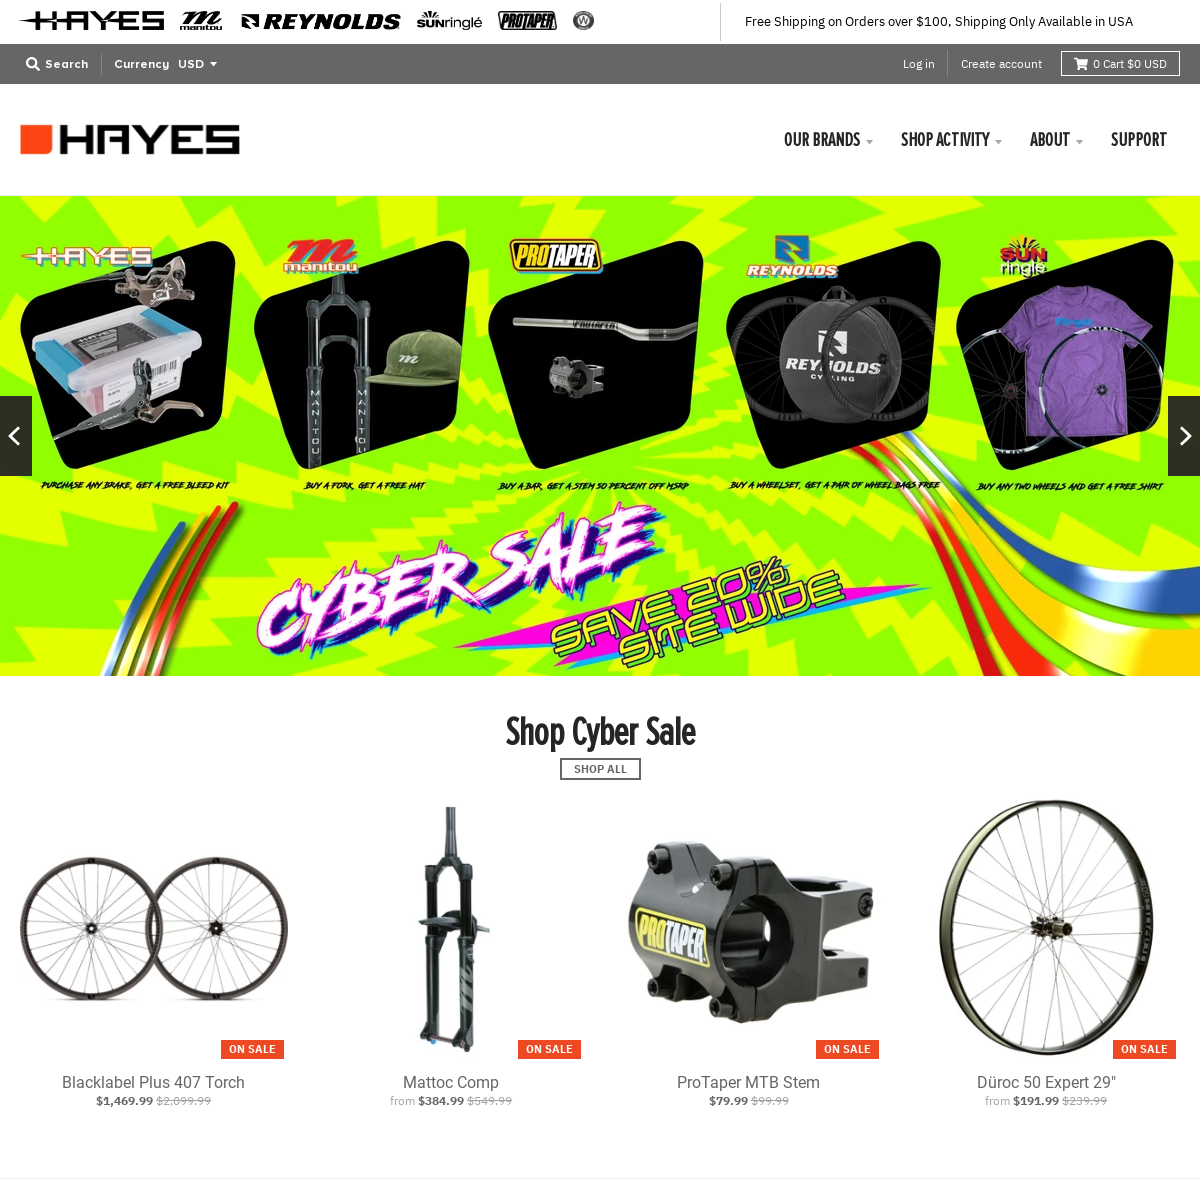 A complete backup of hayesdiscbrake.com